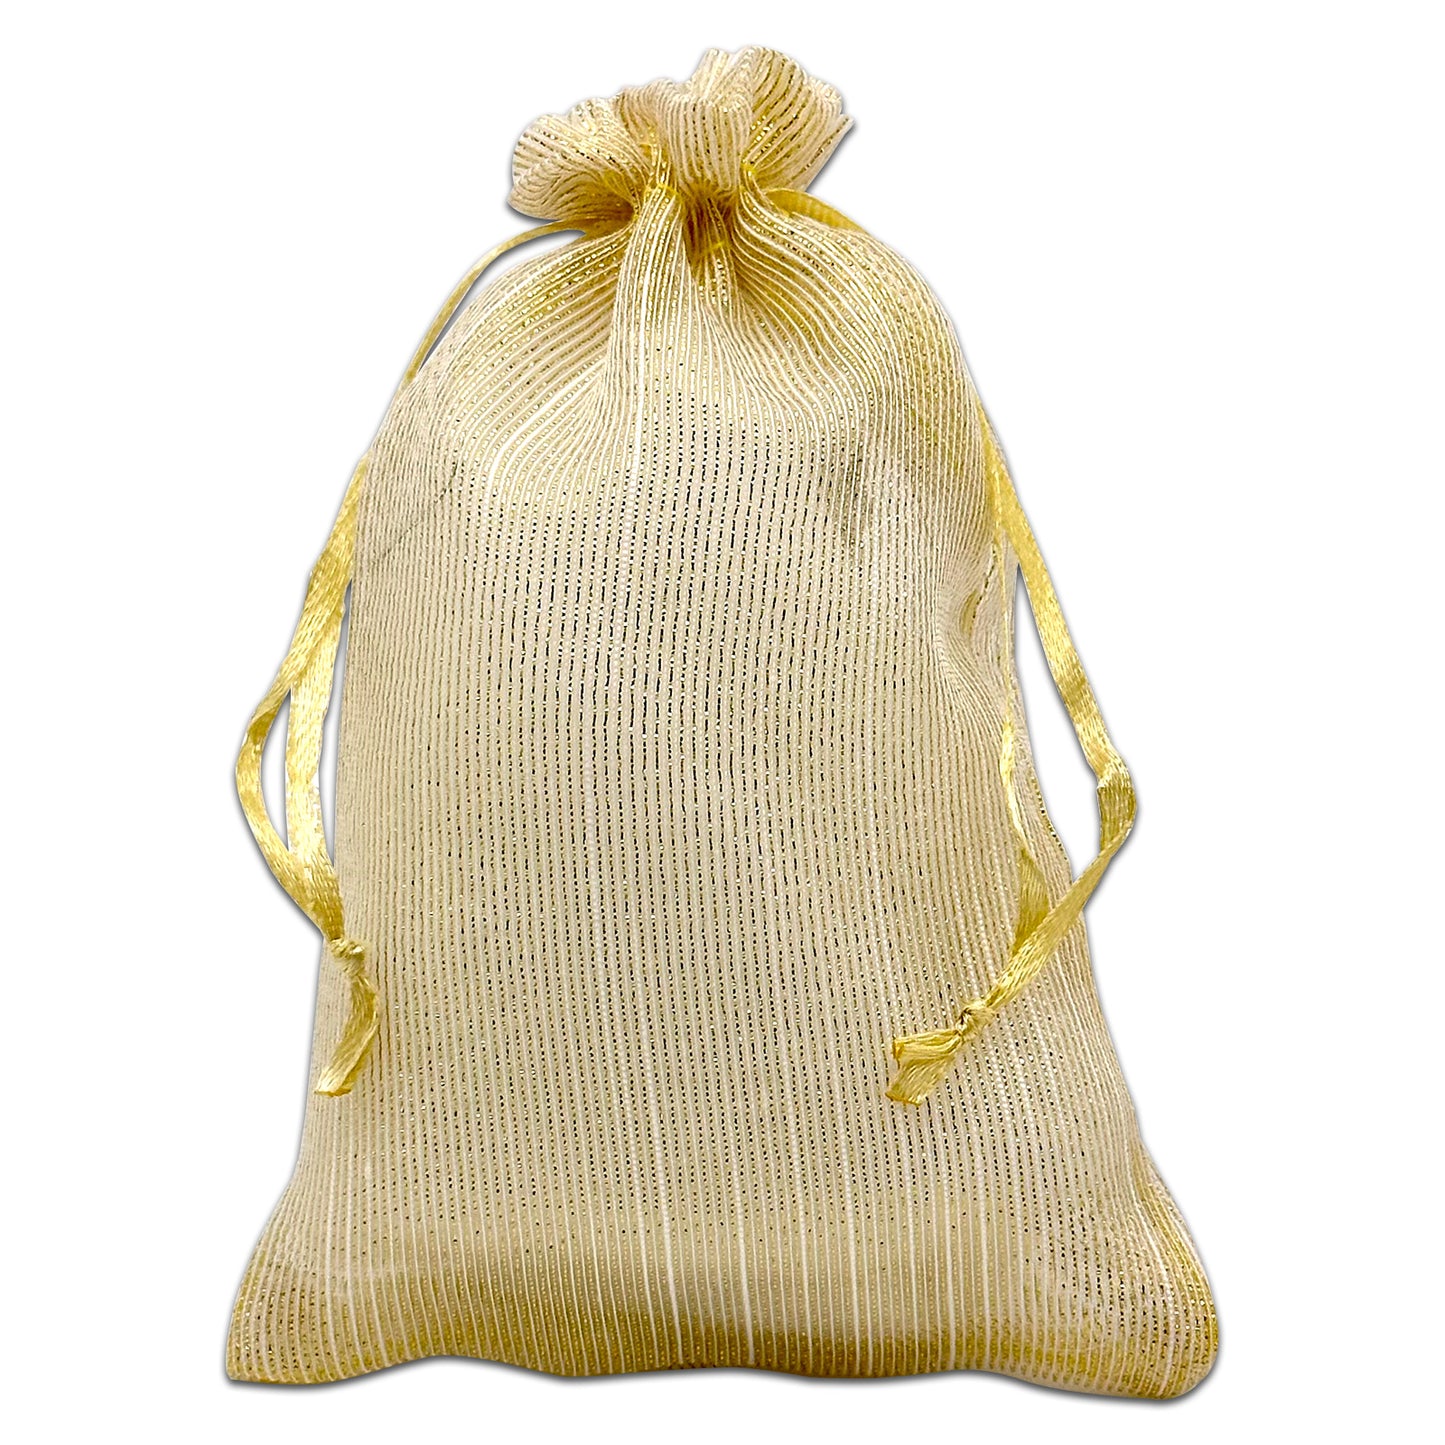 Gold Striped Weave Organza Drawstring Pouch Gift Bags